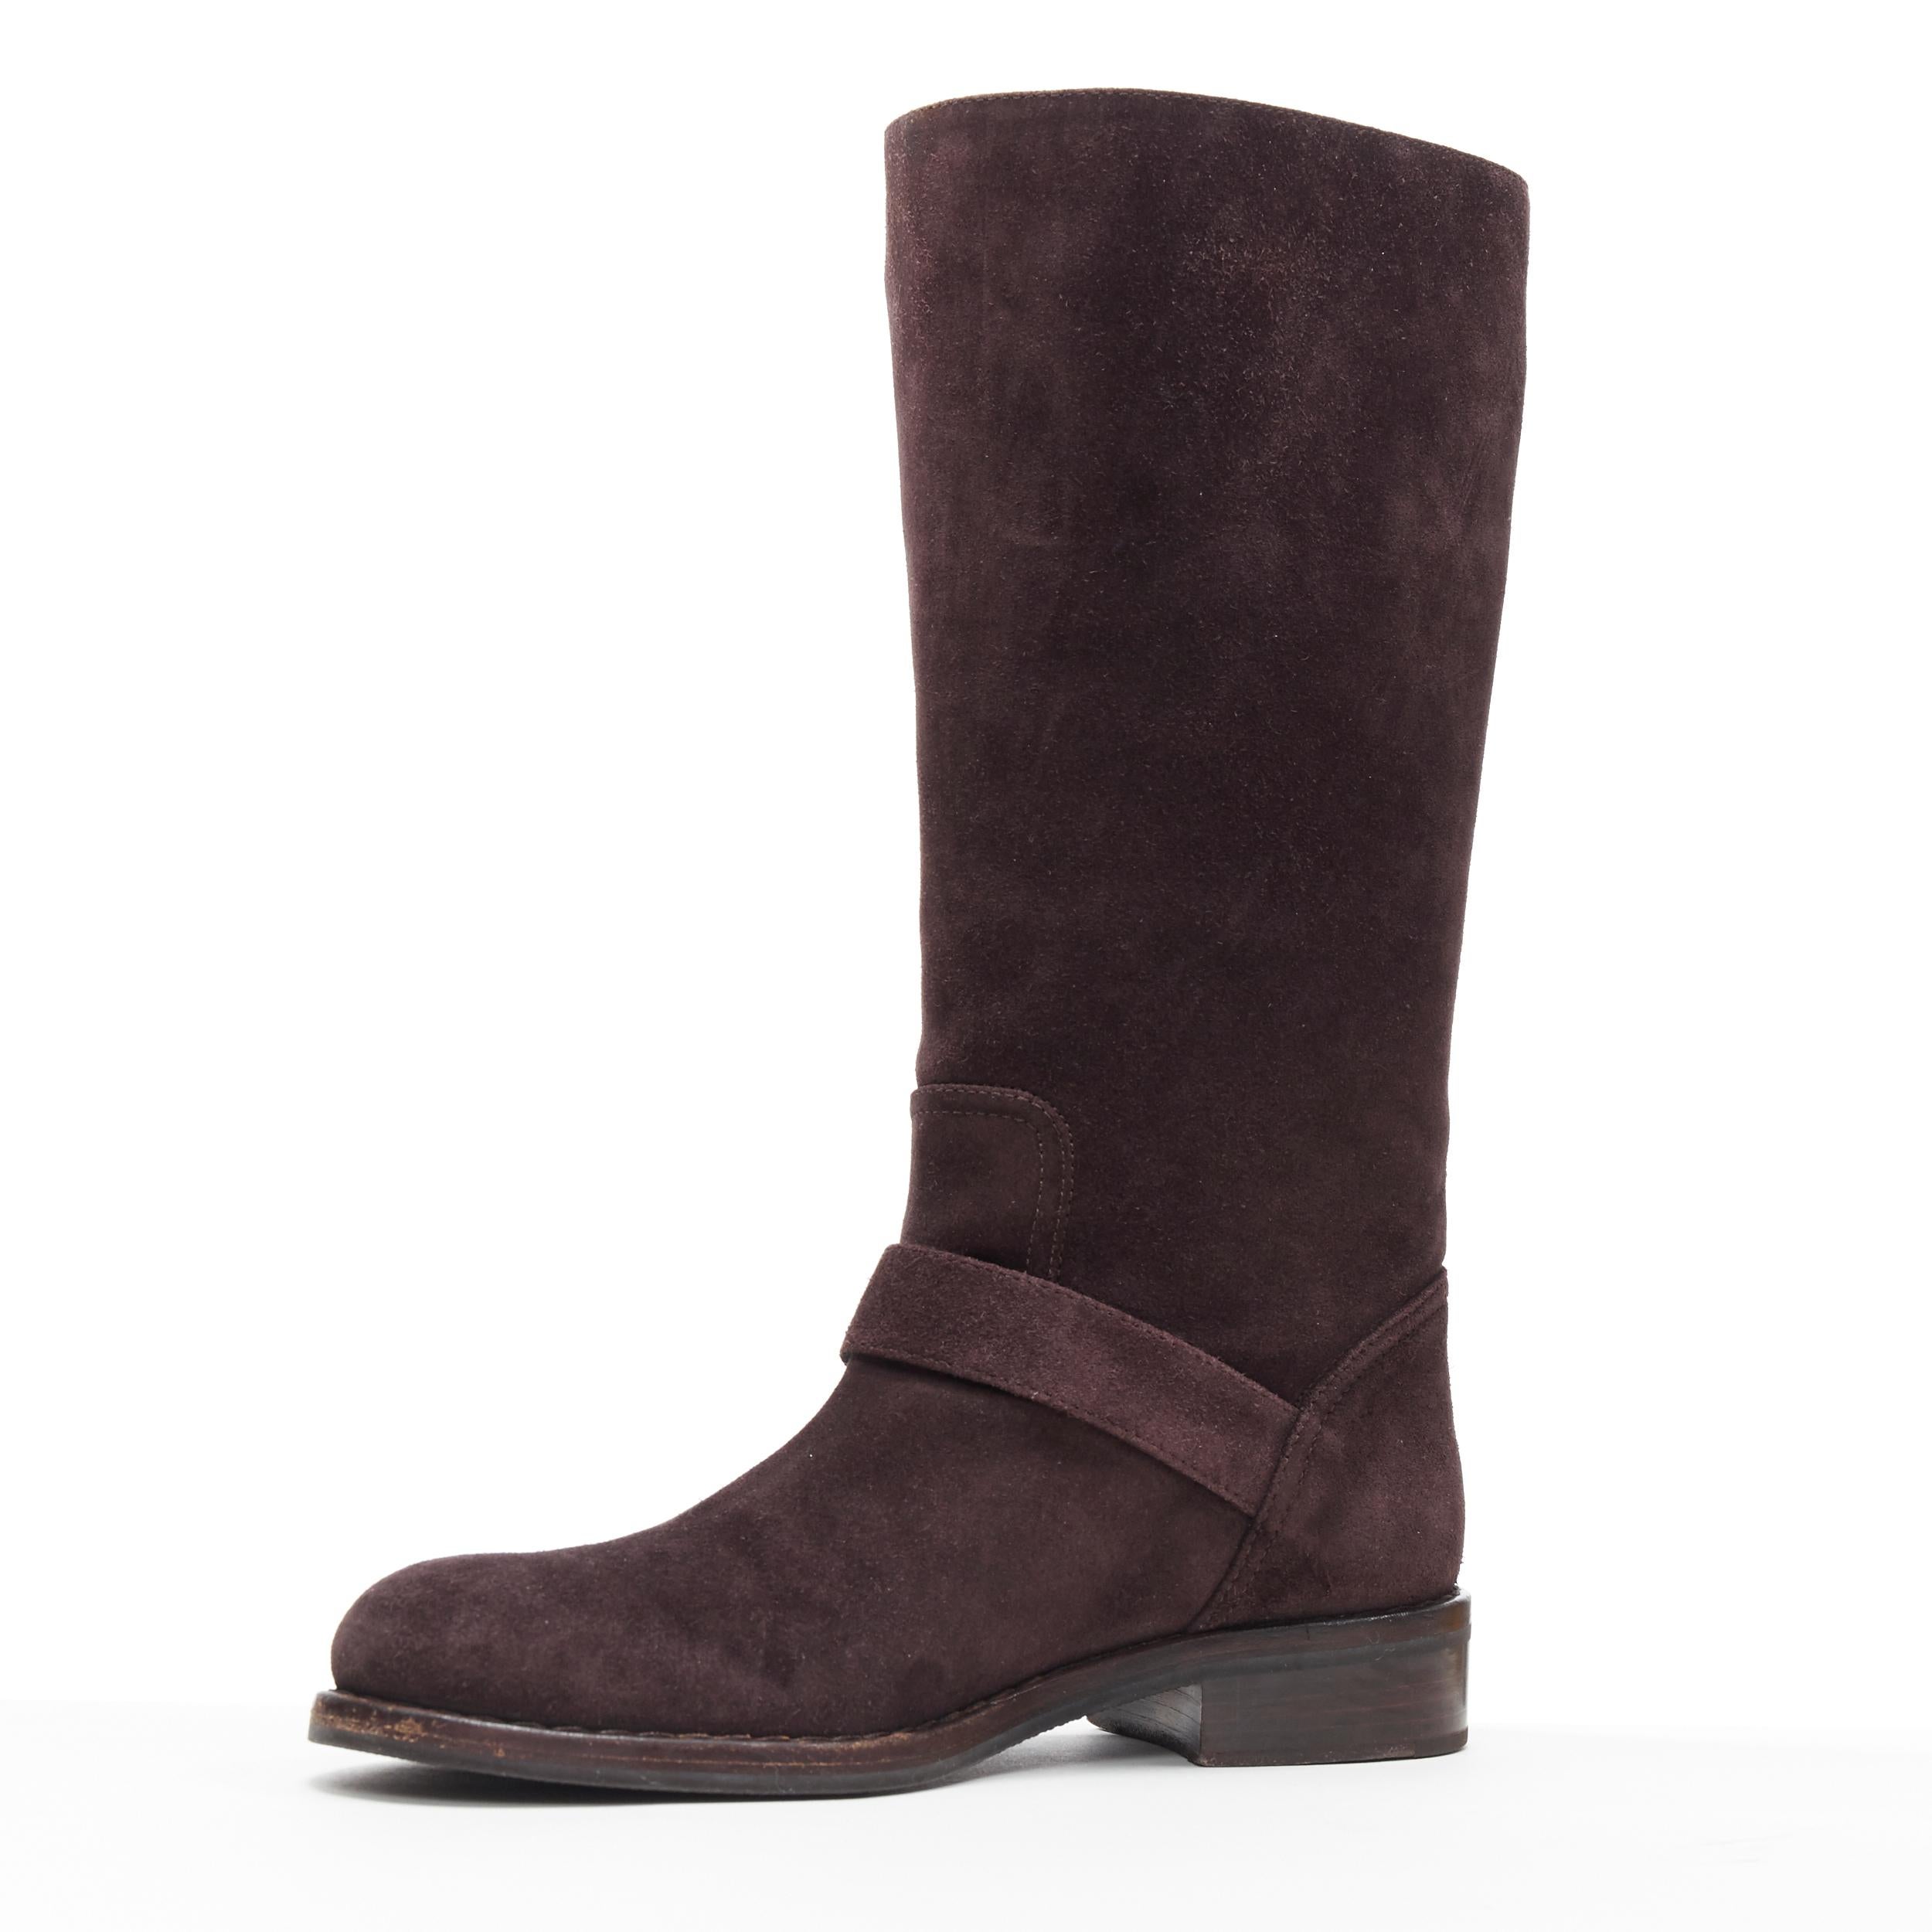 chocolate brown suede tall boots